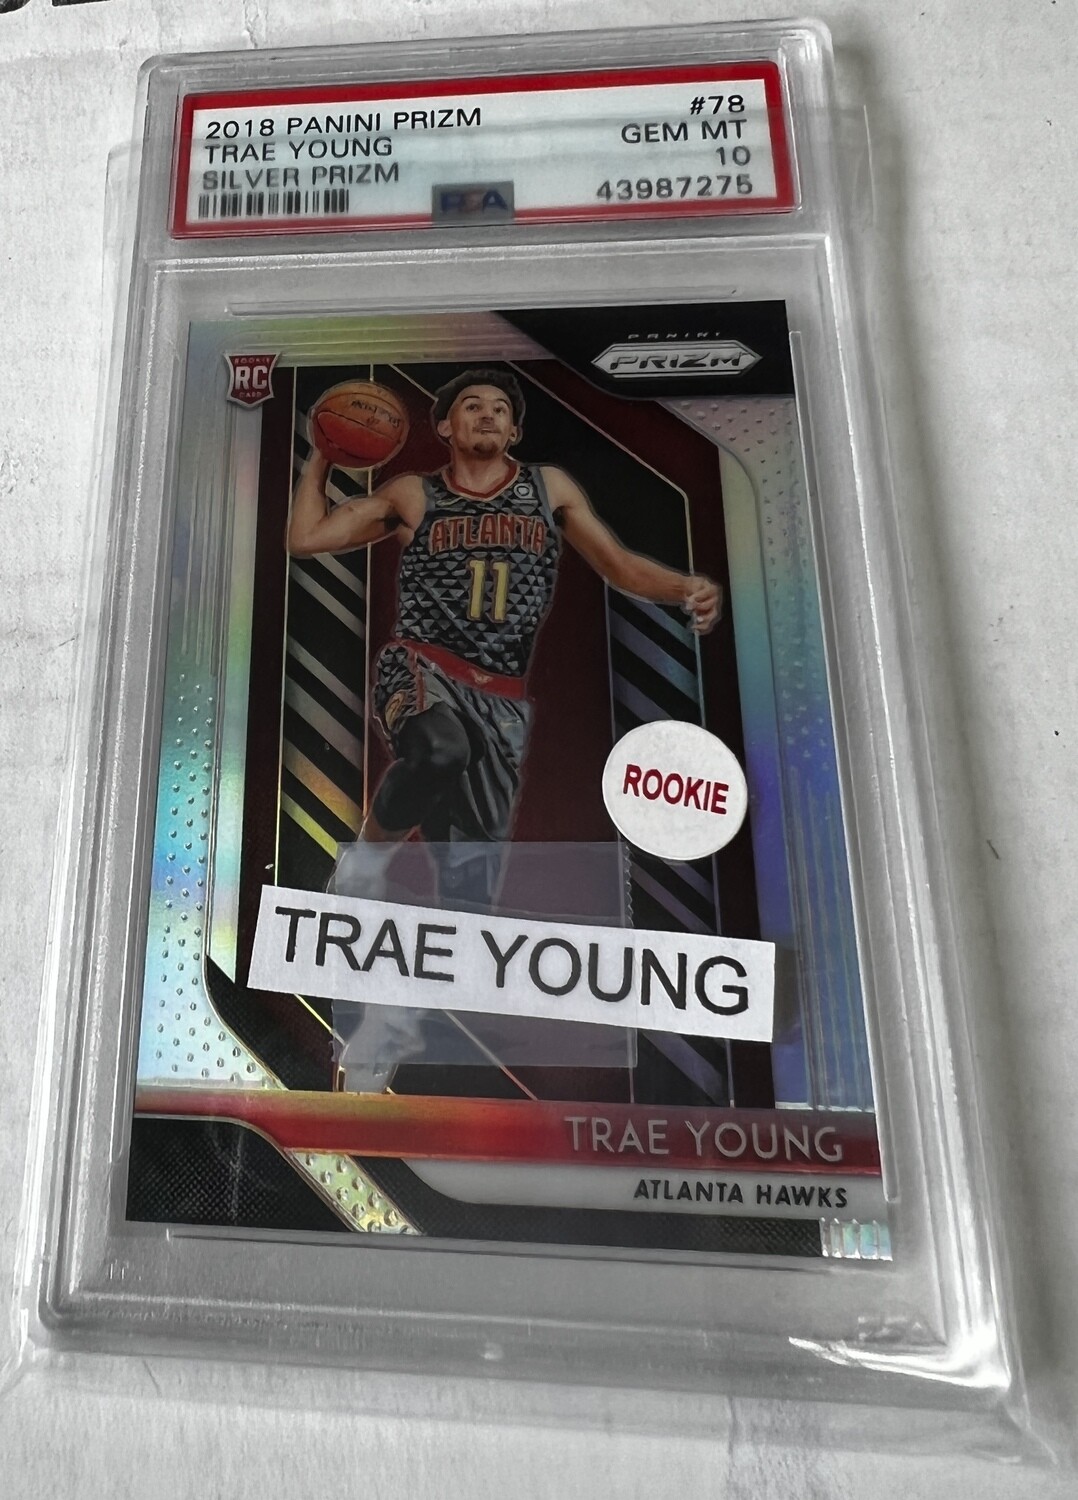 2018 Prizm #78 Trae Young rookie Silver Prizm PSA 10